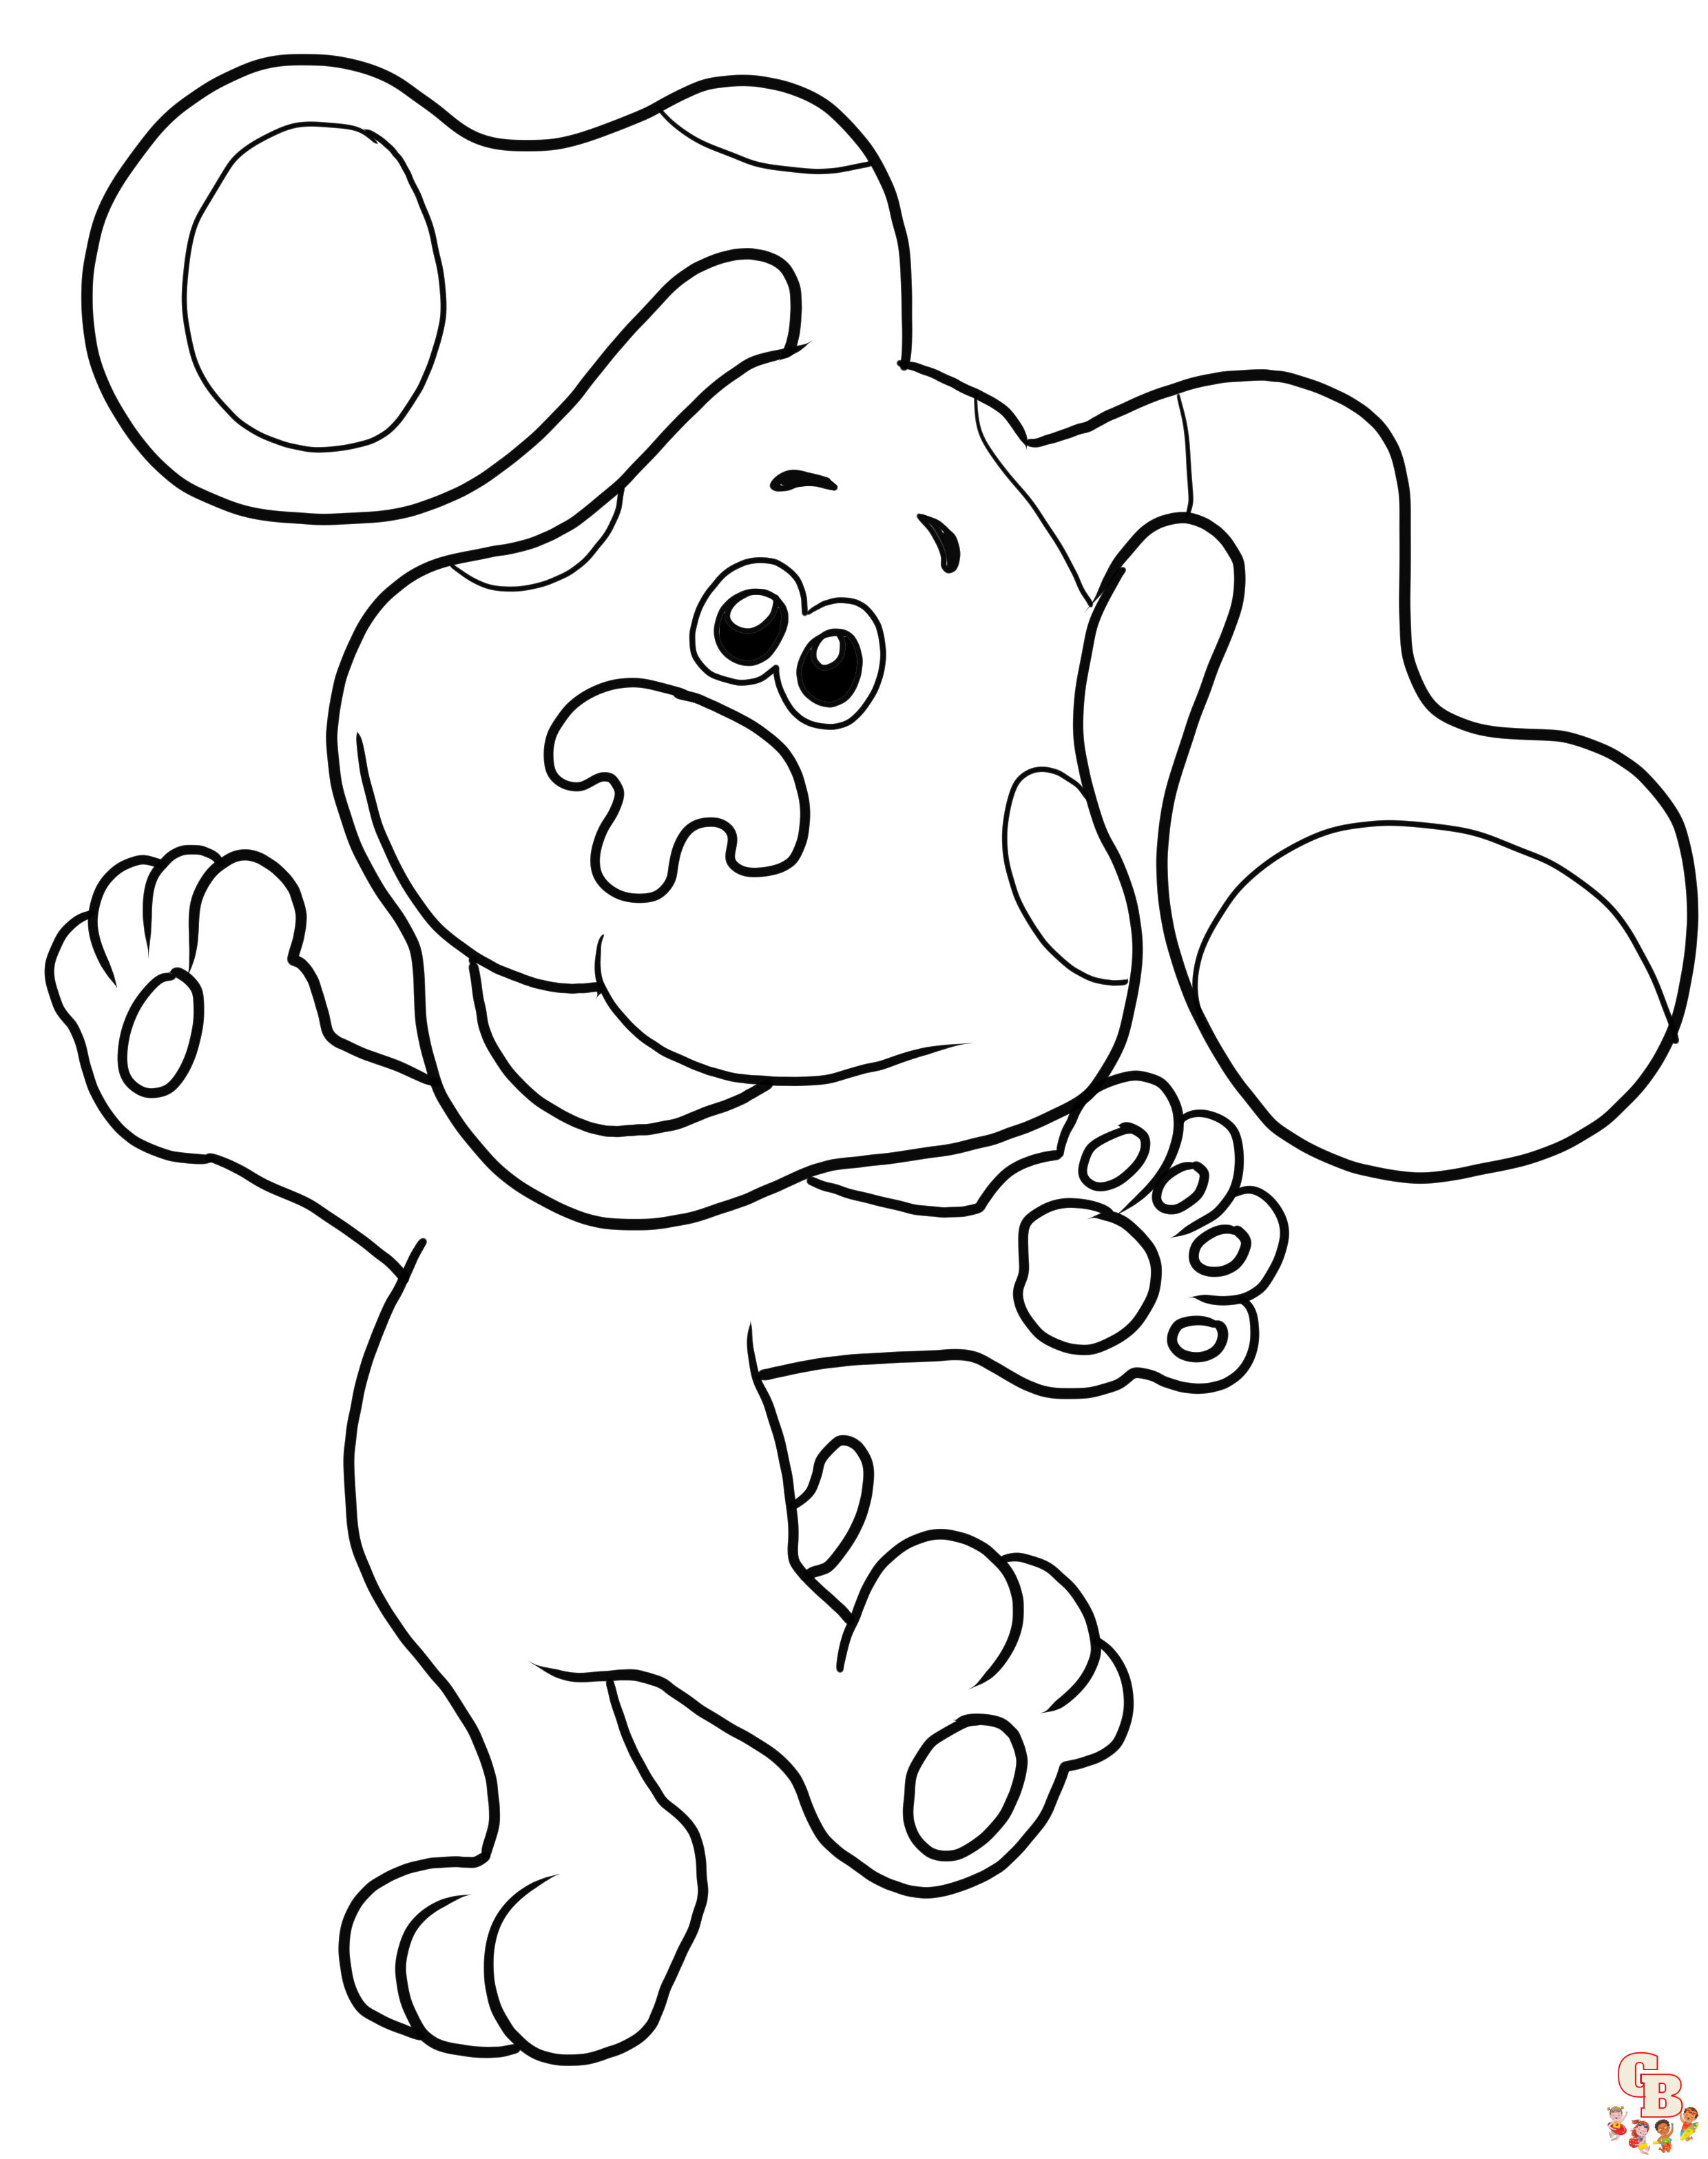 Blues Clues Coloring Pages 2